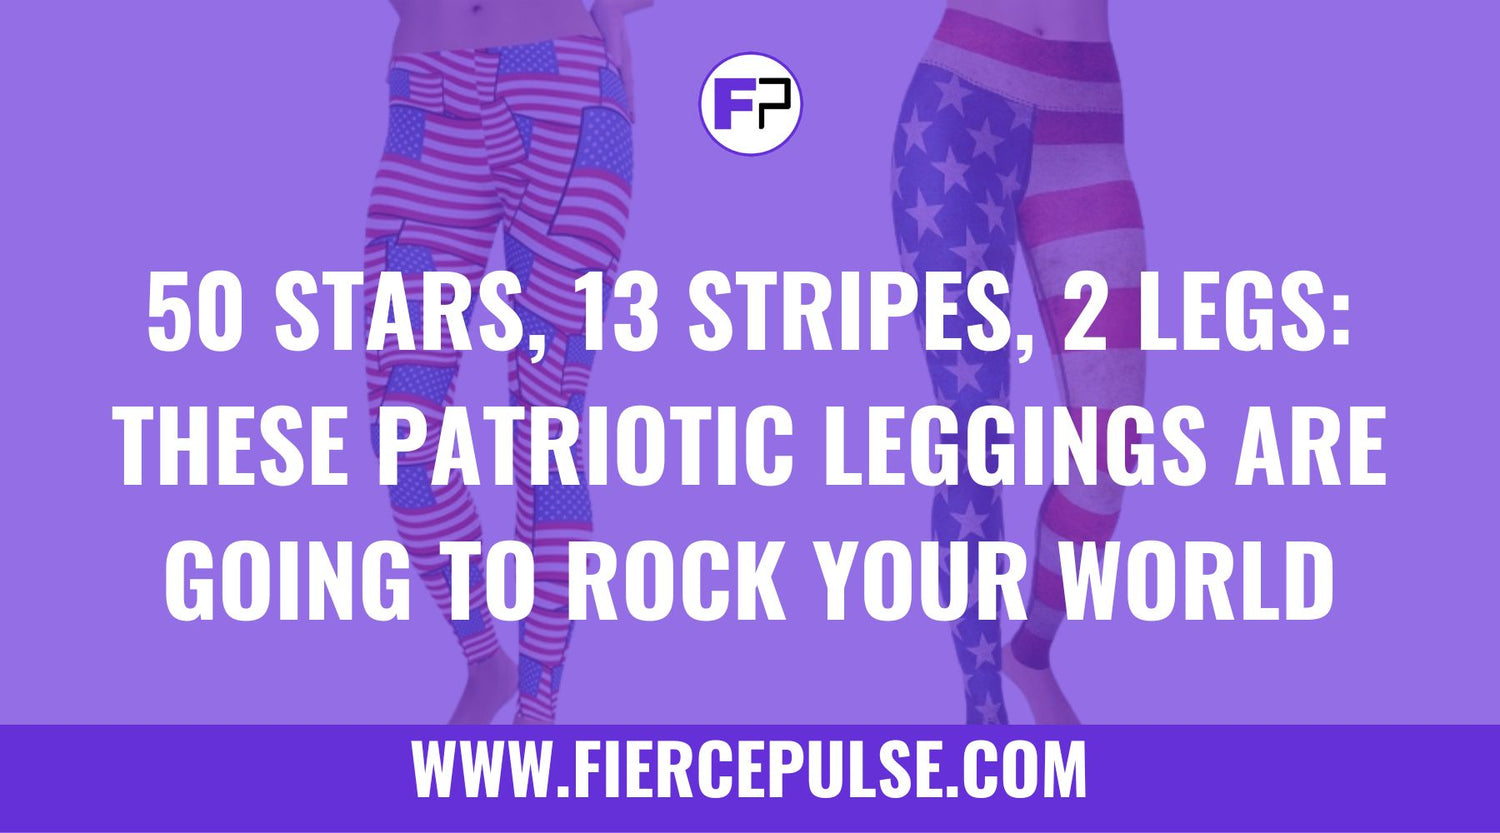 50 Stars, 13 Stripes, 2 Legs: These Patriotic Leggings Are Going to Rock Your World